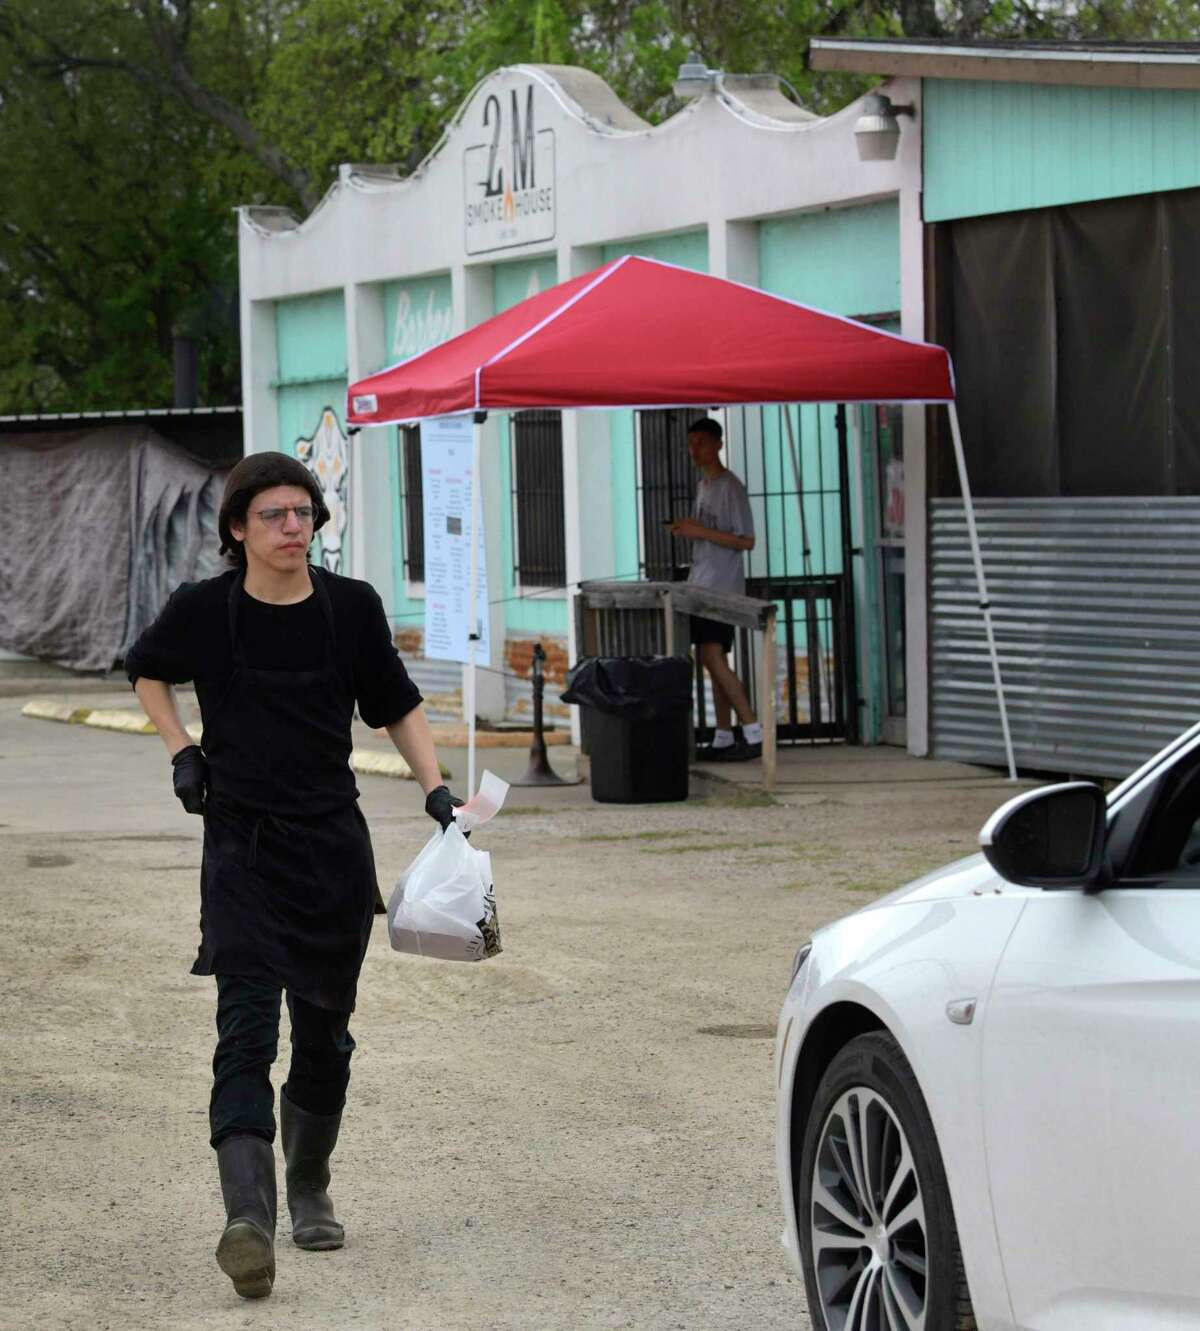 Nathaniel Campos rushes an order to a waiting customer at 2M Smokehouse. The acclaimed barbecue joint has now moved to a system where all of the food is sold to go with a makeshift drive-thru operation due to coronavirus precautionary measures.